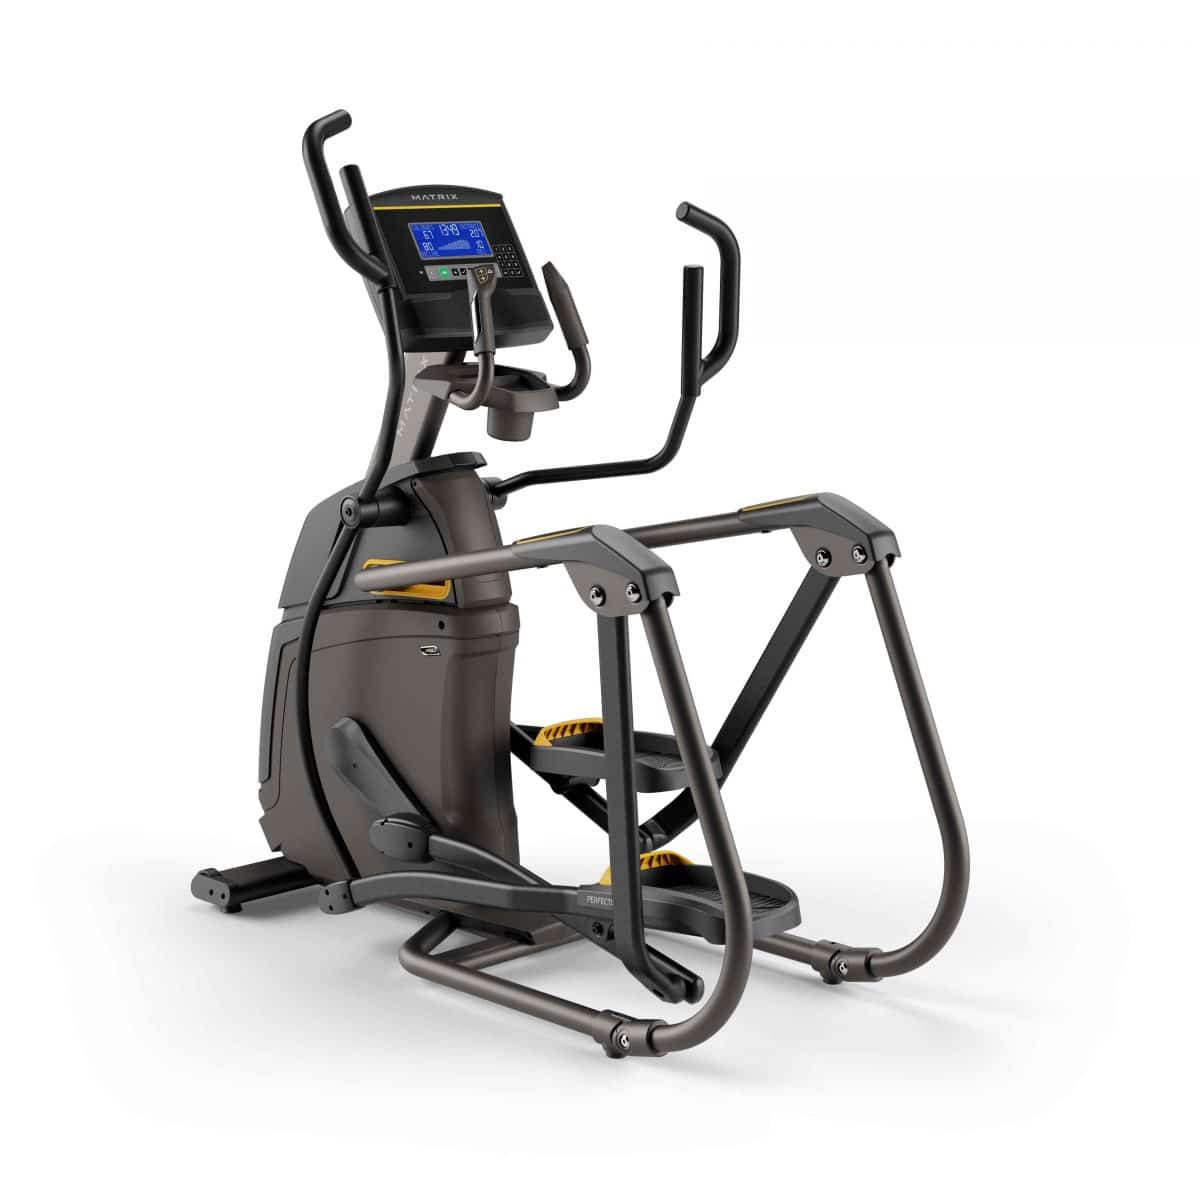 A stationary exercise bike with a digital display